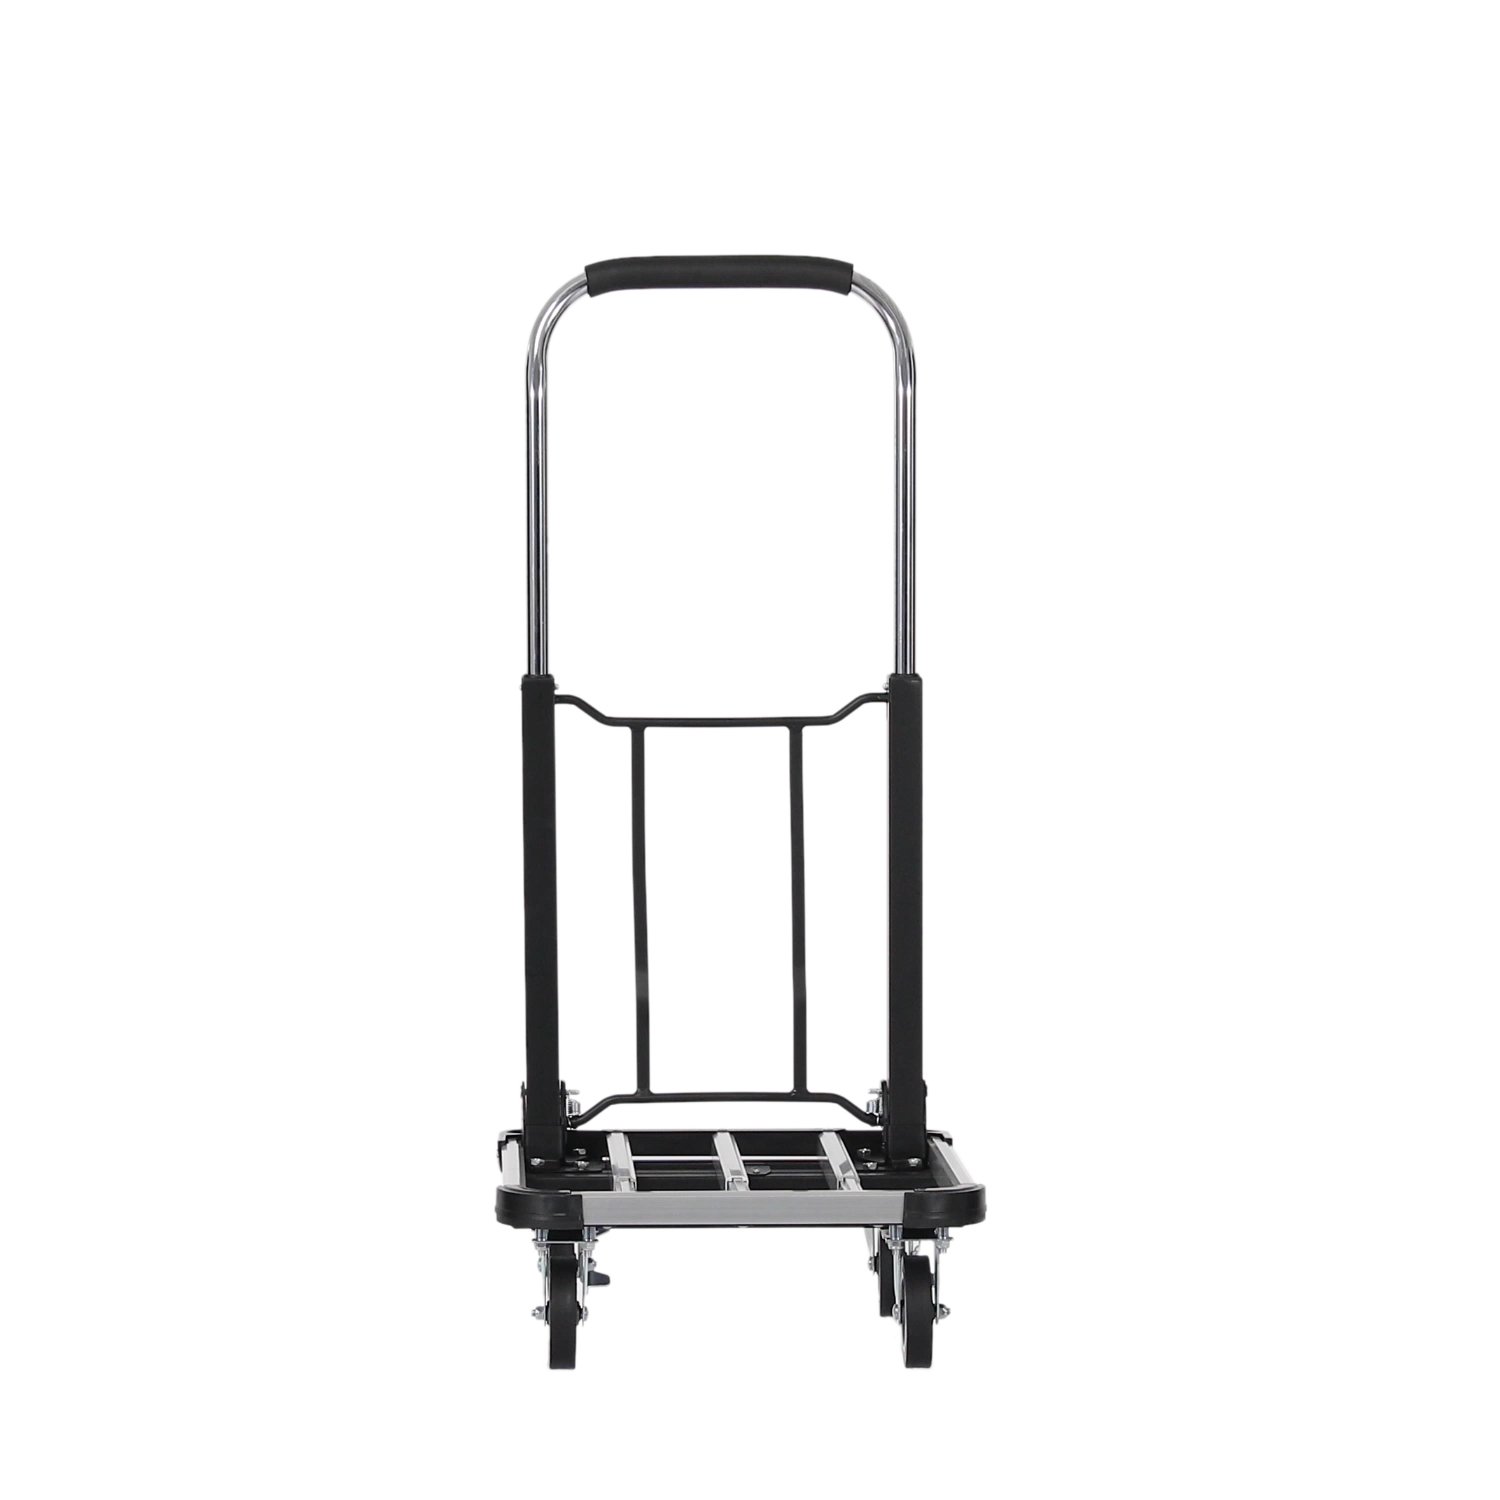 MoNiBloom Telescoping Platform Hand Truck, Folding Dolly Cart for Luggage Baggage Moving, Black/Silver